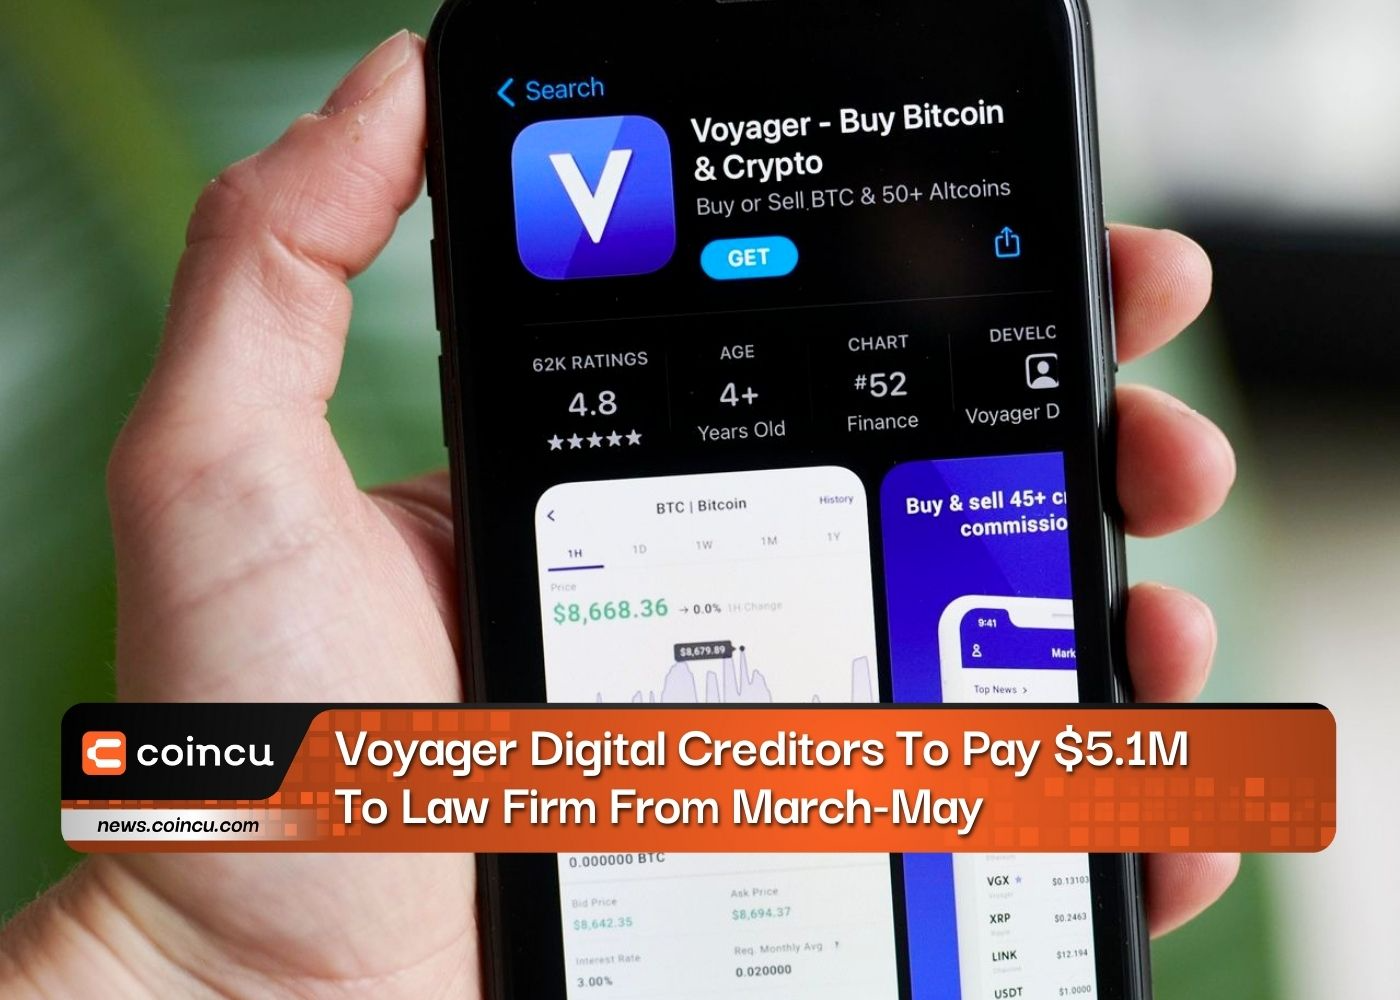 Voyager Digital Creditors To Pay $5.1M To Law Firm From March-May